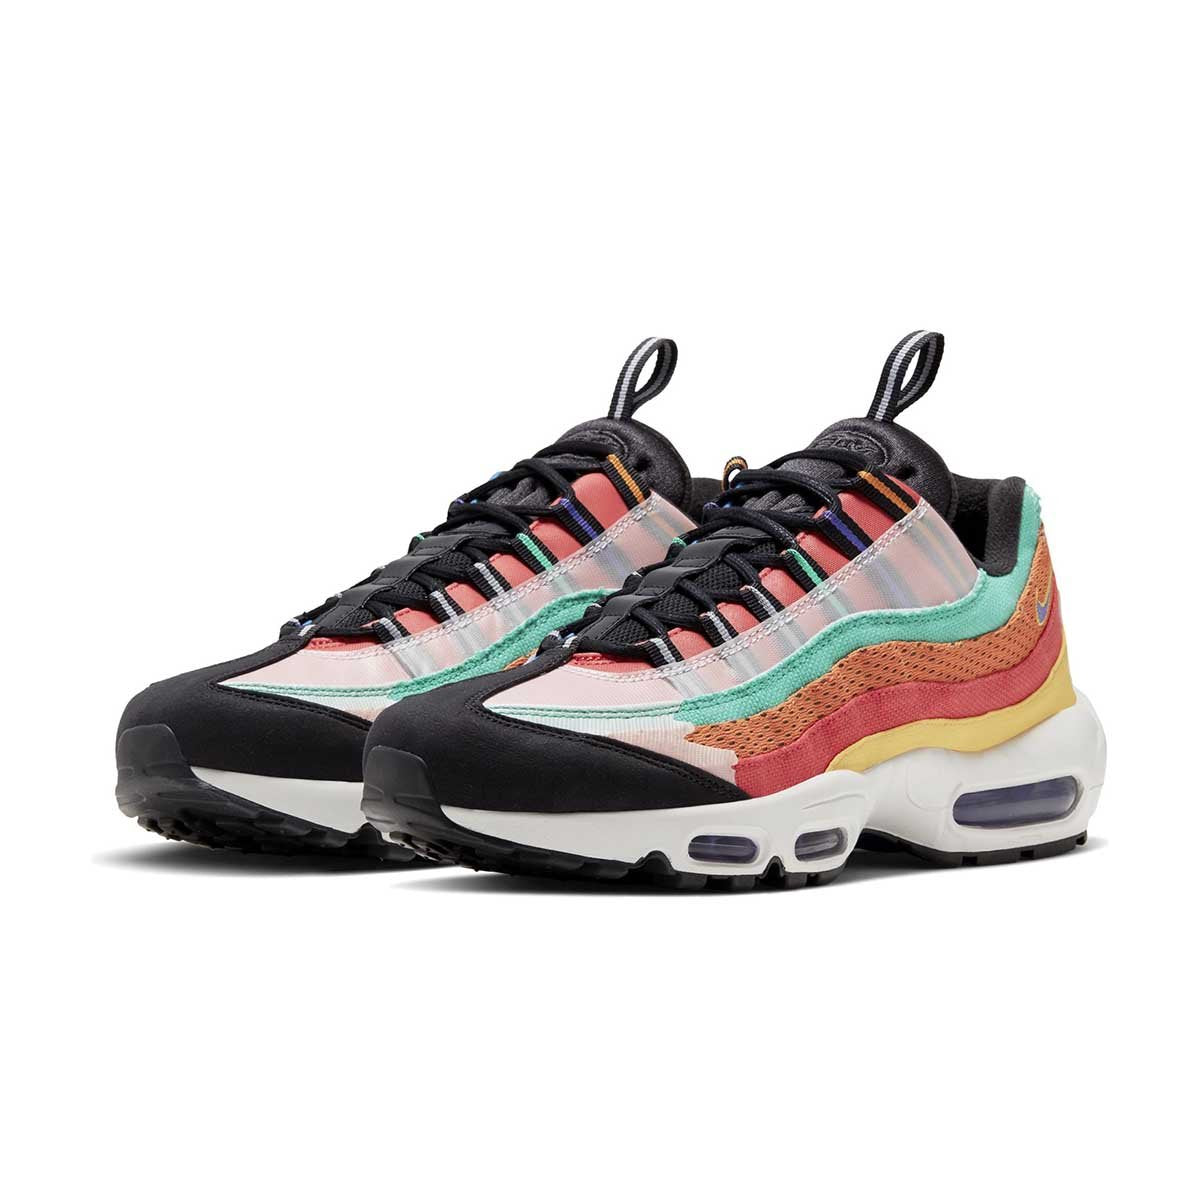 Men's Nike Air Max 95 Black History Month - Shoes